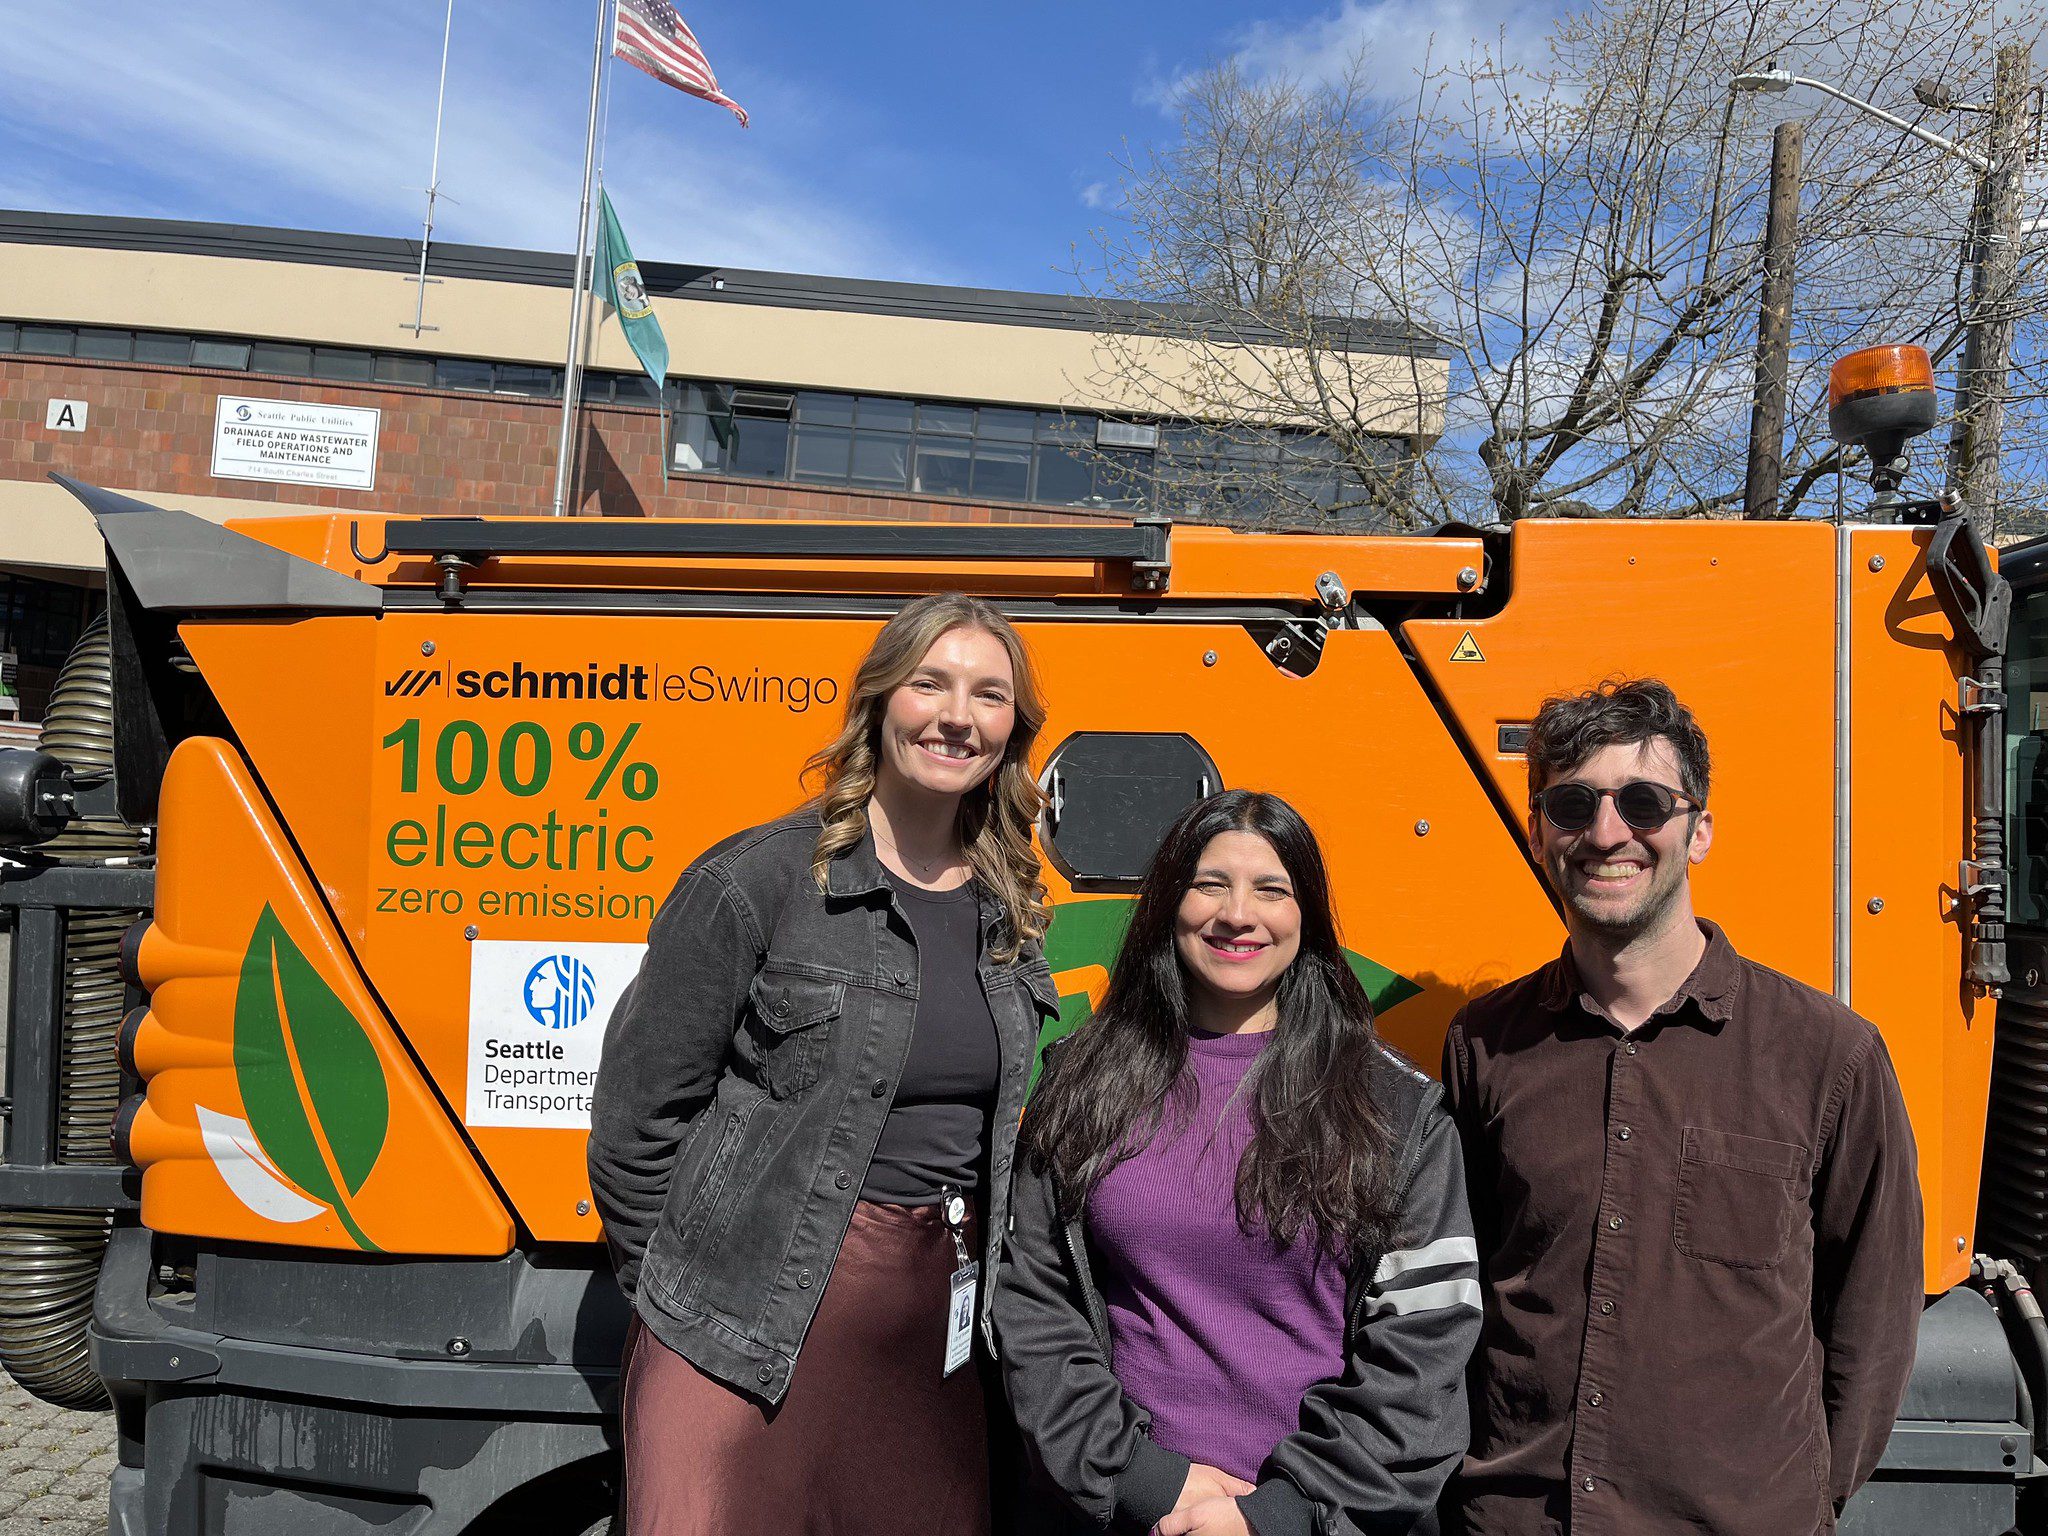 Three people stand together outside in front of a large orange electric sweeper on a sunny day.